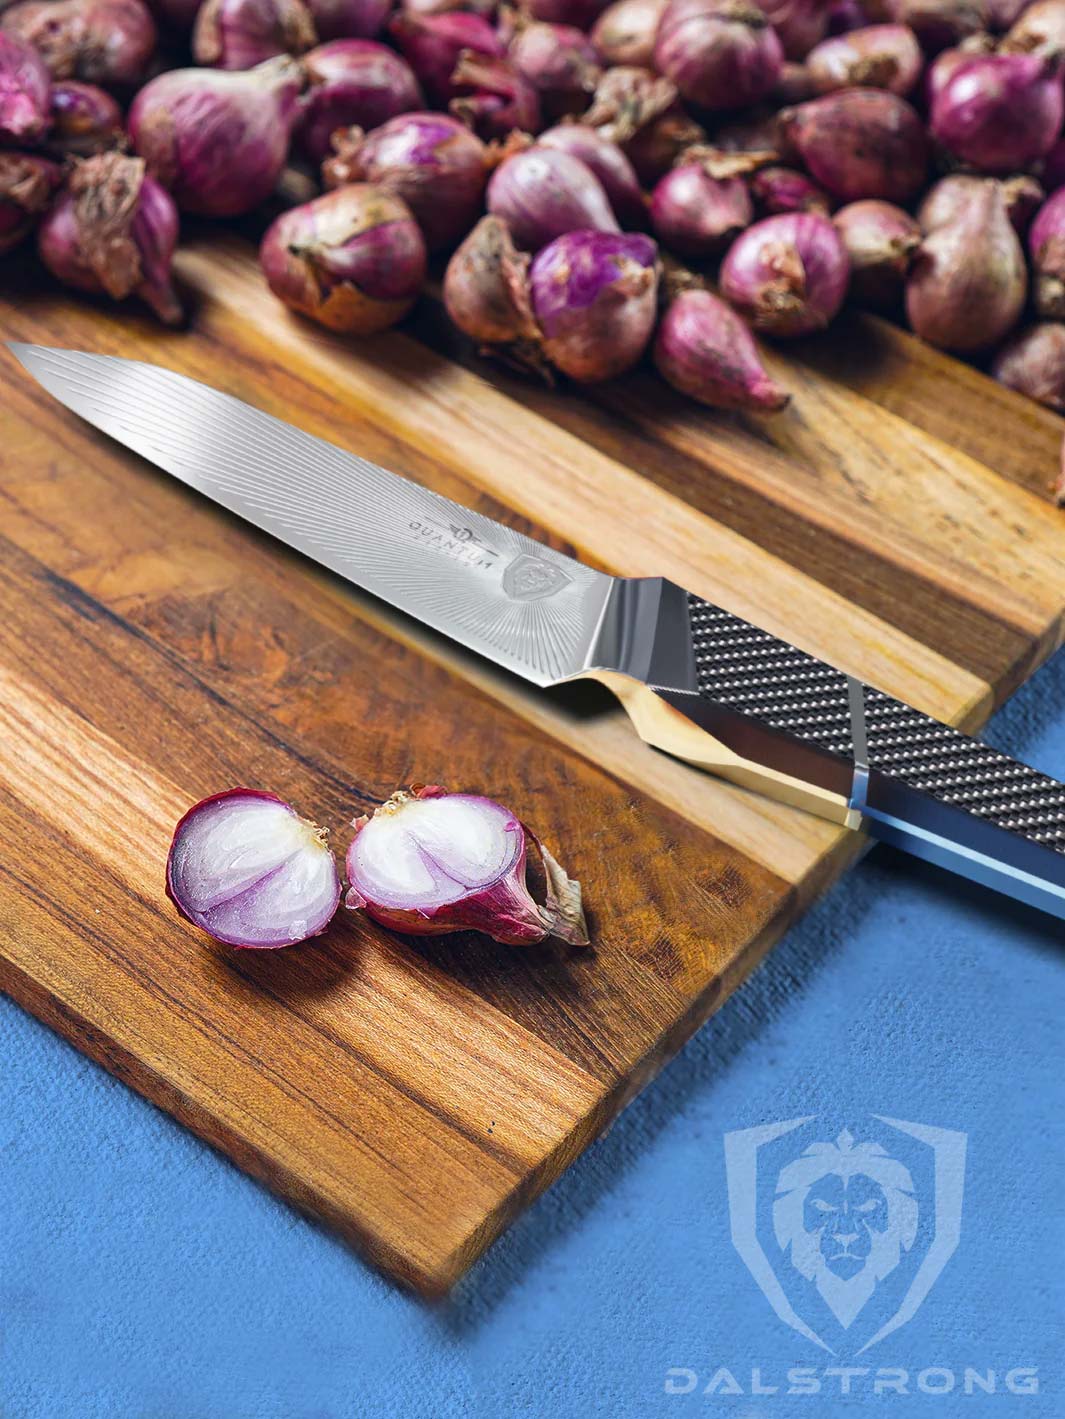 Dalstrong quantum 1 series 6 inch utility knife with dragon skin handle and onions ona a cutting board.